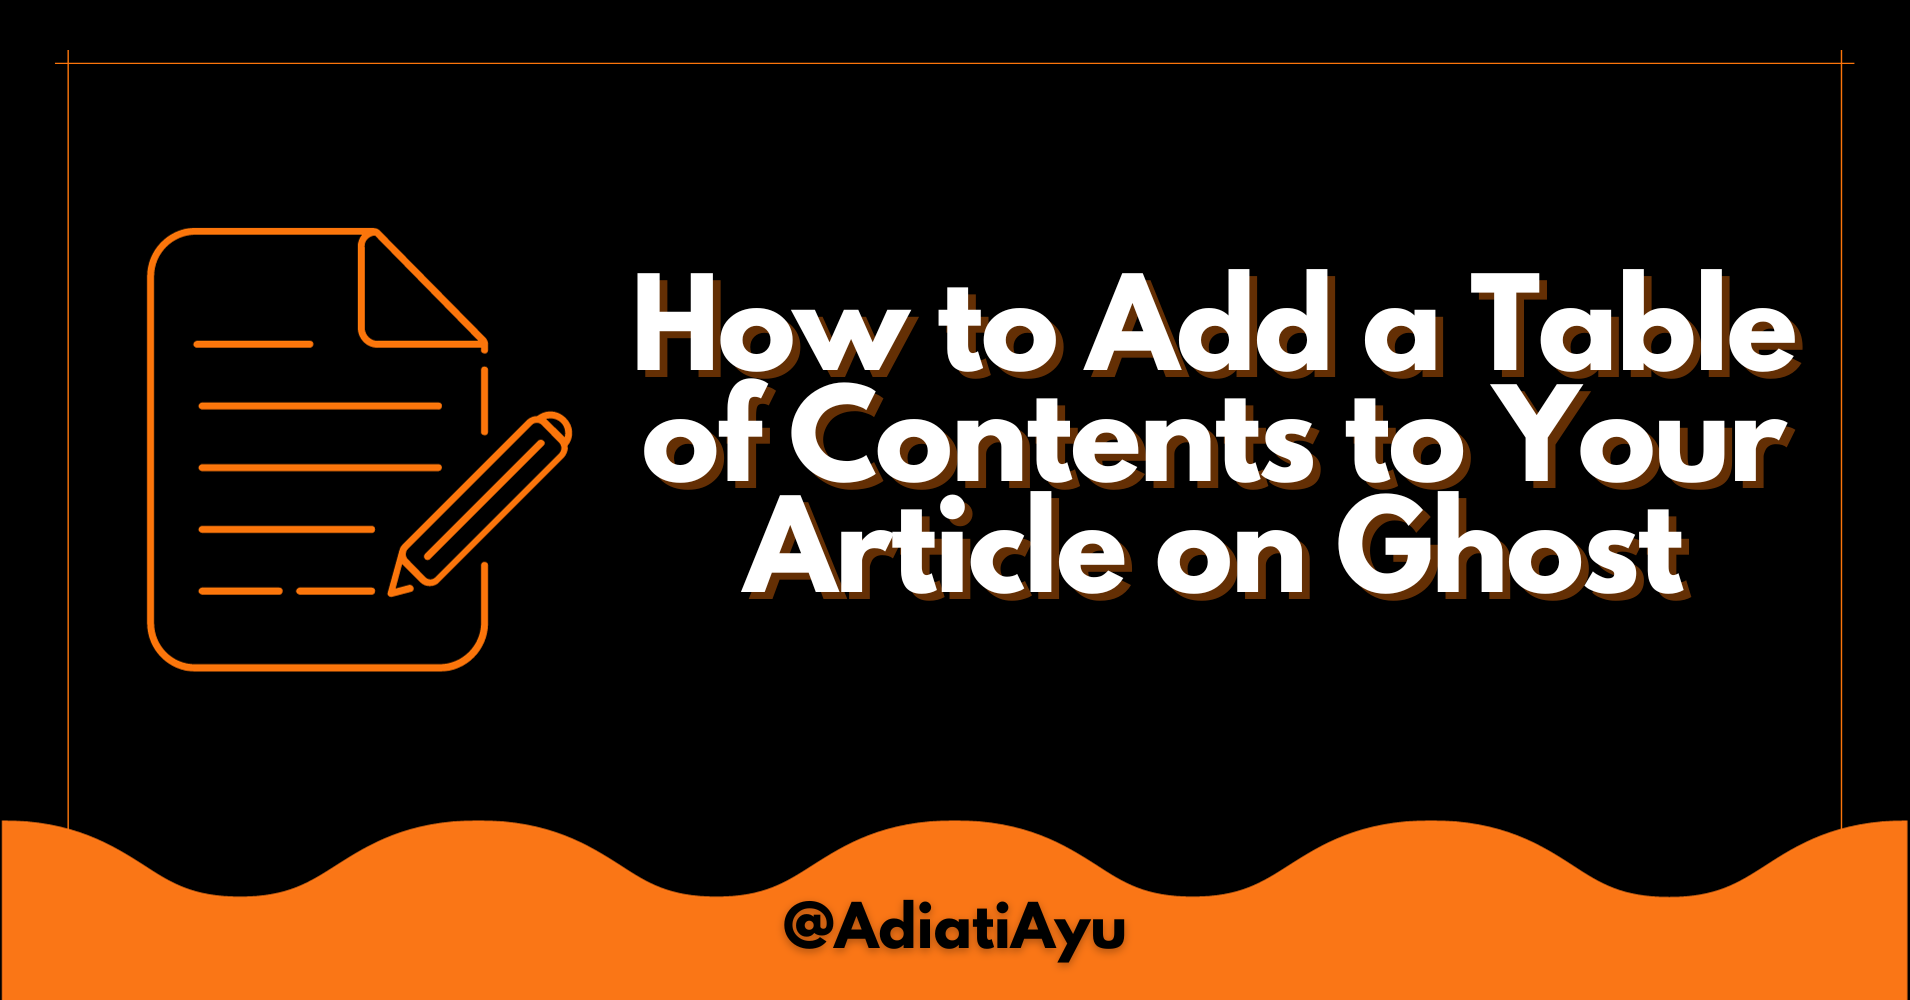 How to Add a Table of Contents to Your Article on Ghost